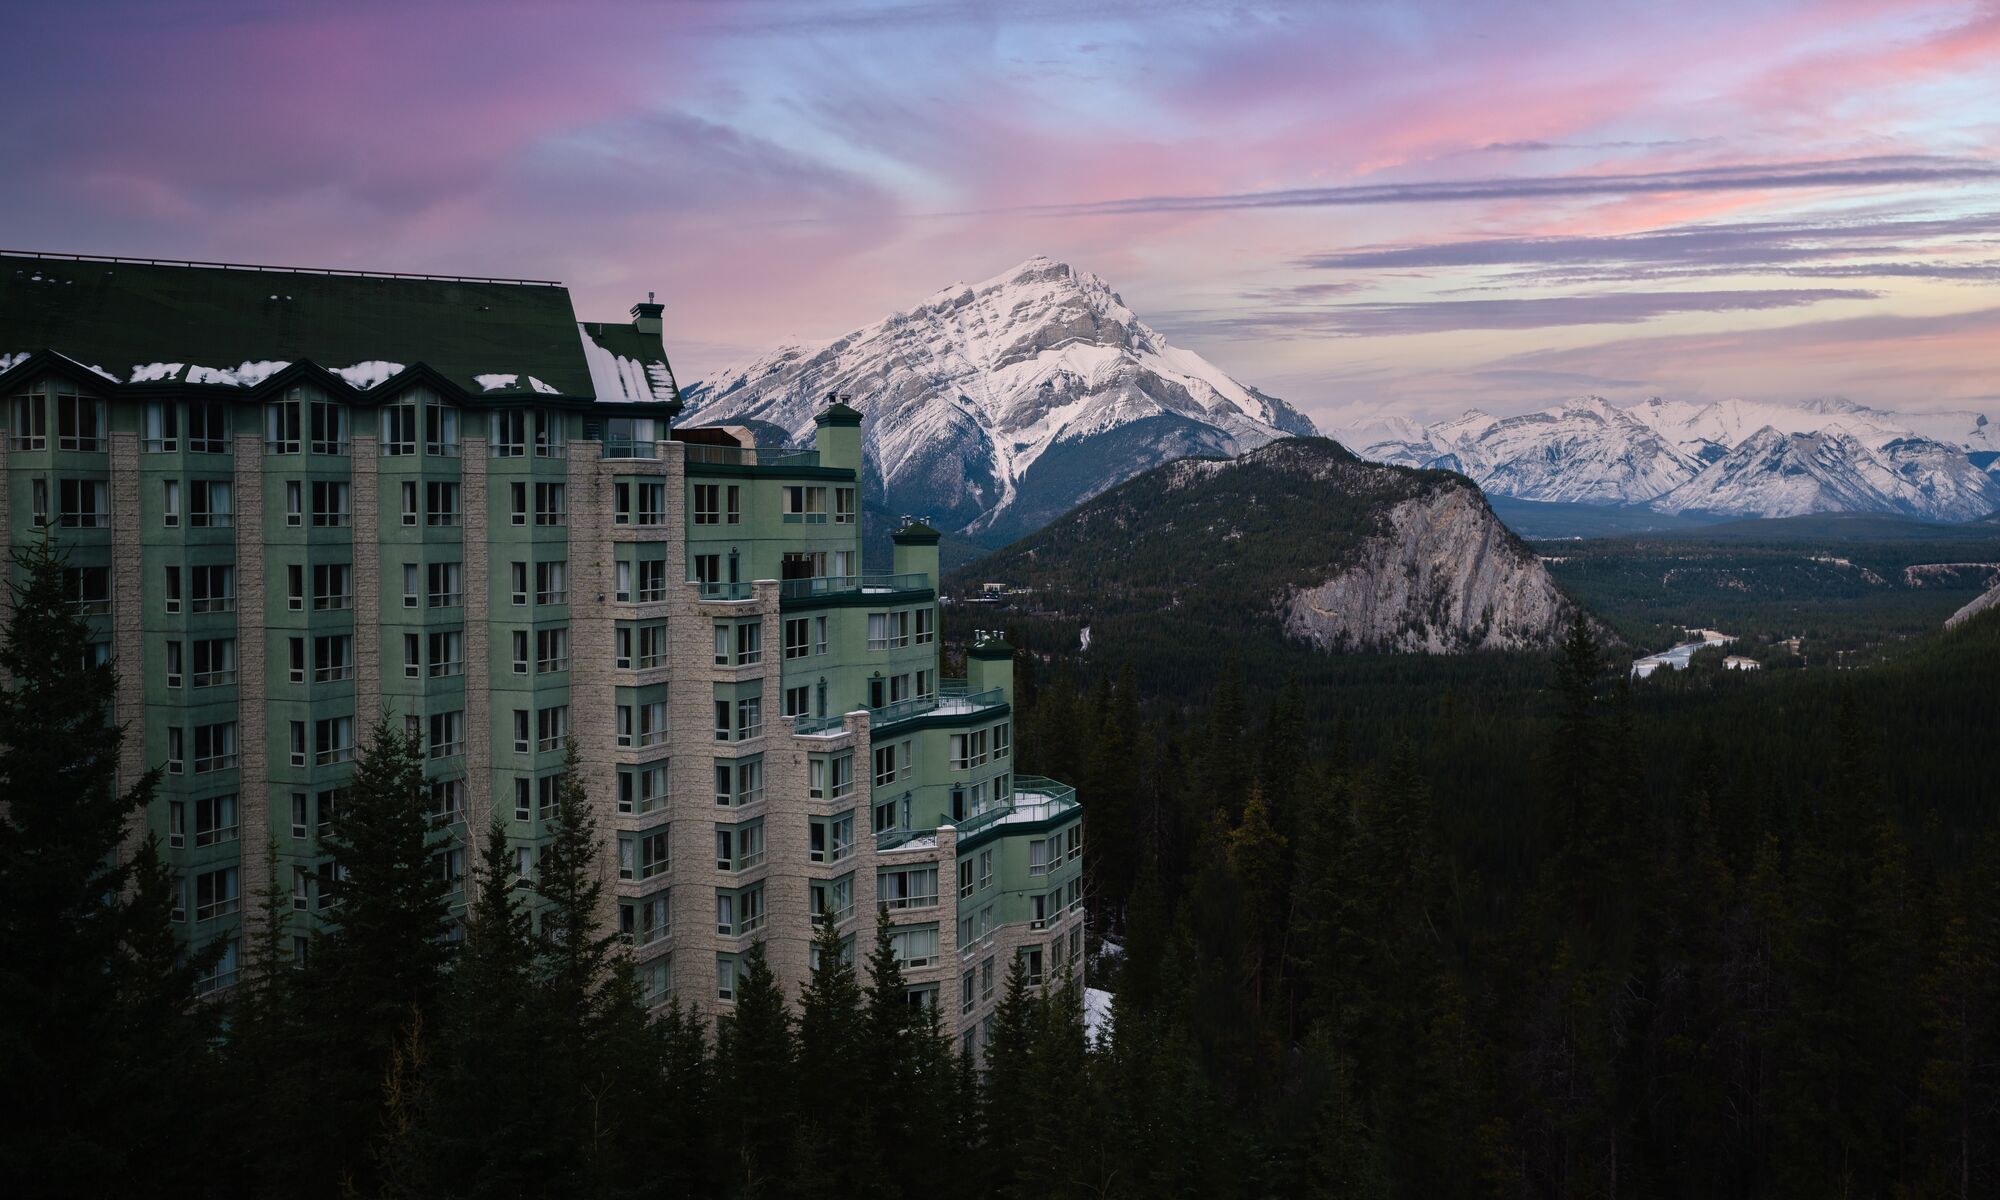 View from the Rimrock Hotel in Banff with Cascade Mountain and Tunnel Mountain.